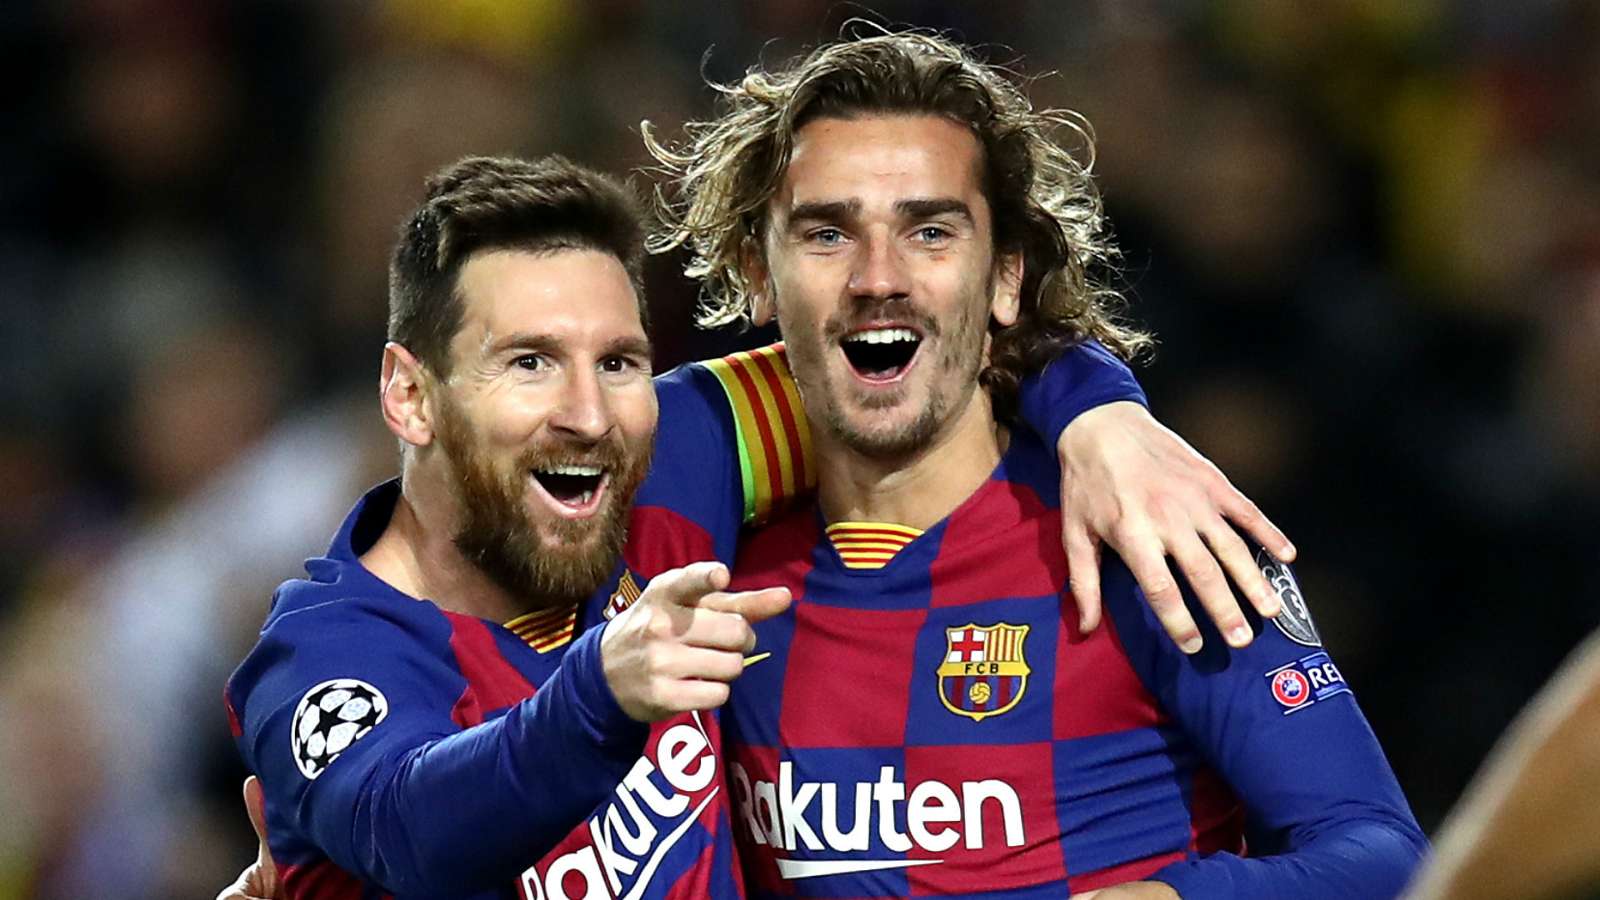 'We may never see a player like Messi again' - Griezmann amazed by Barcelona superstar - Bóng Đá